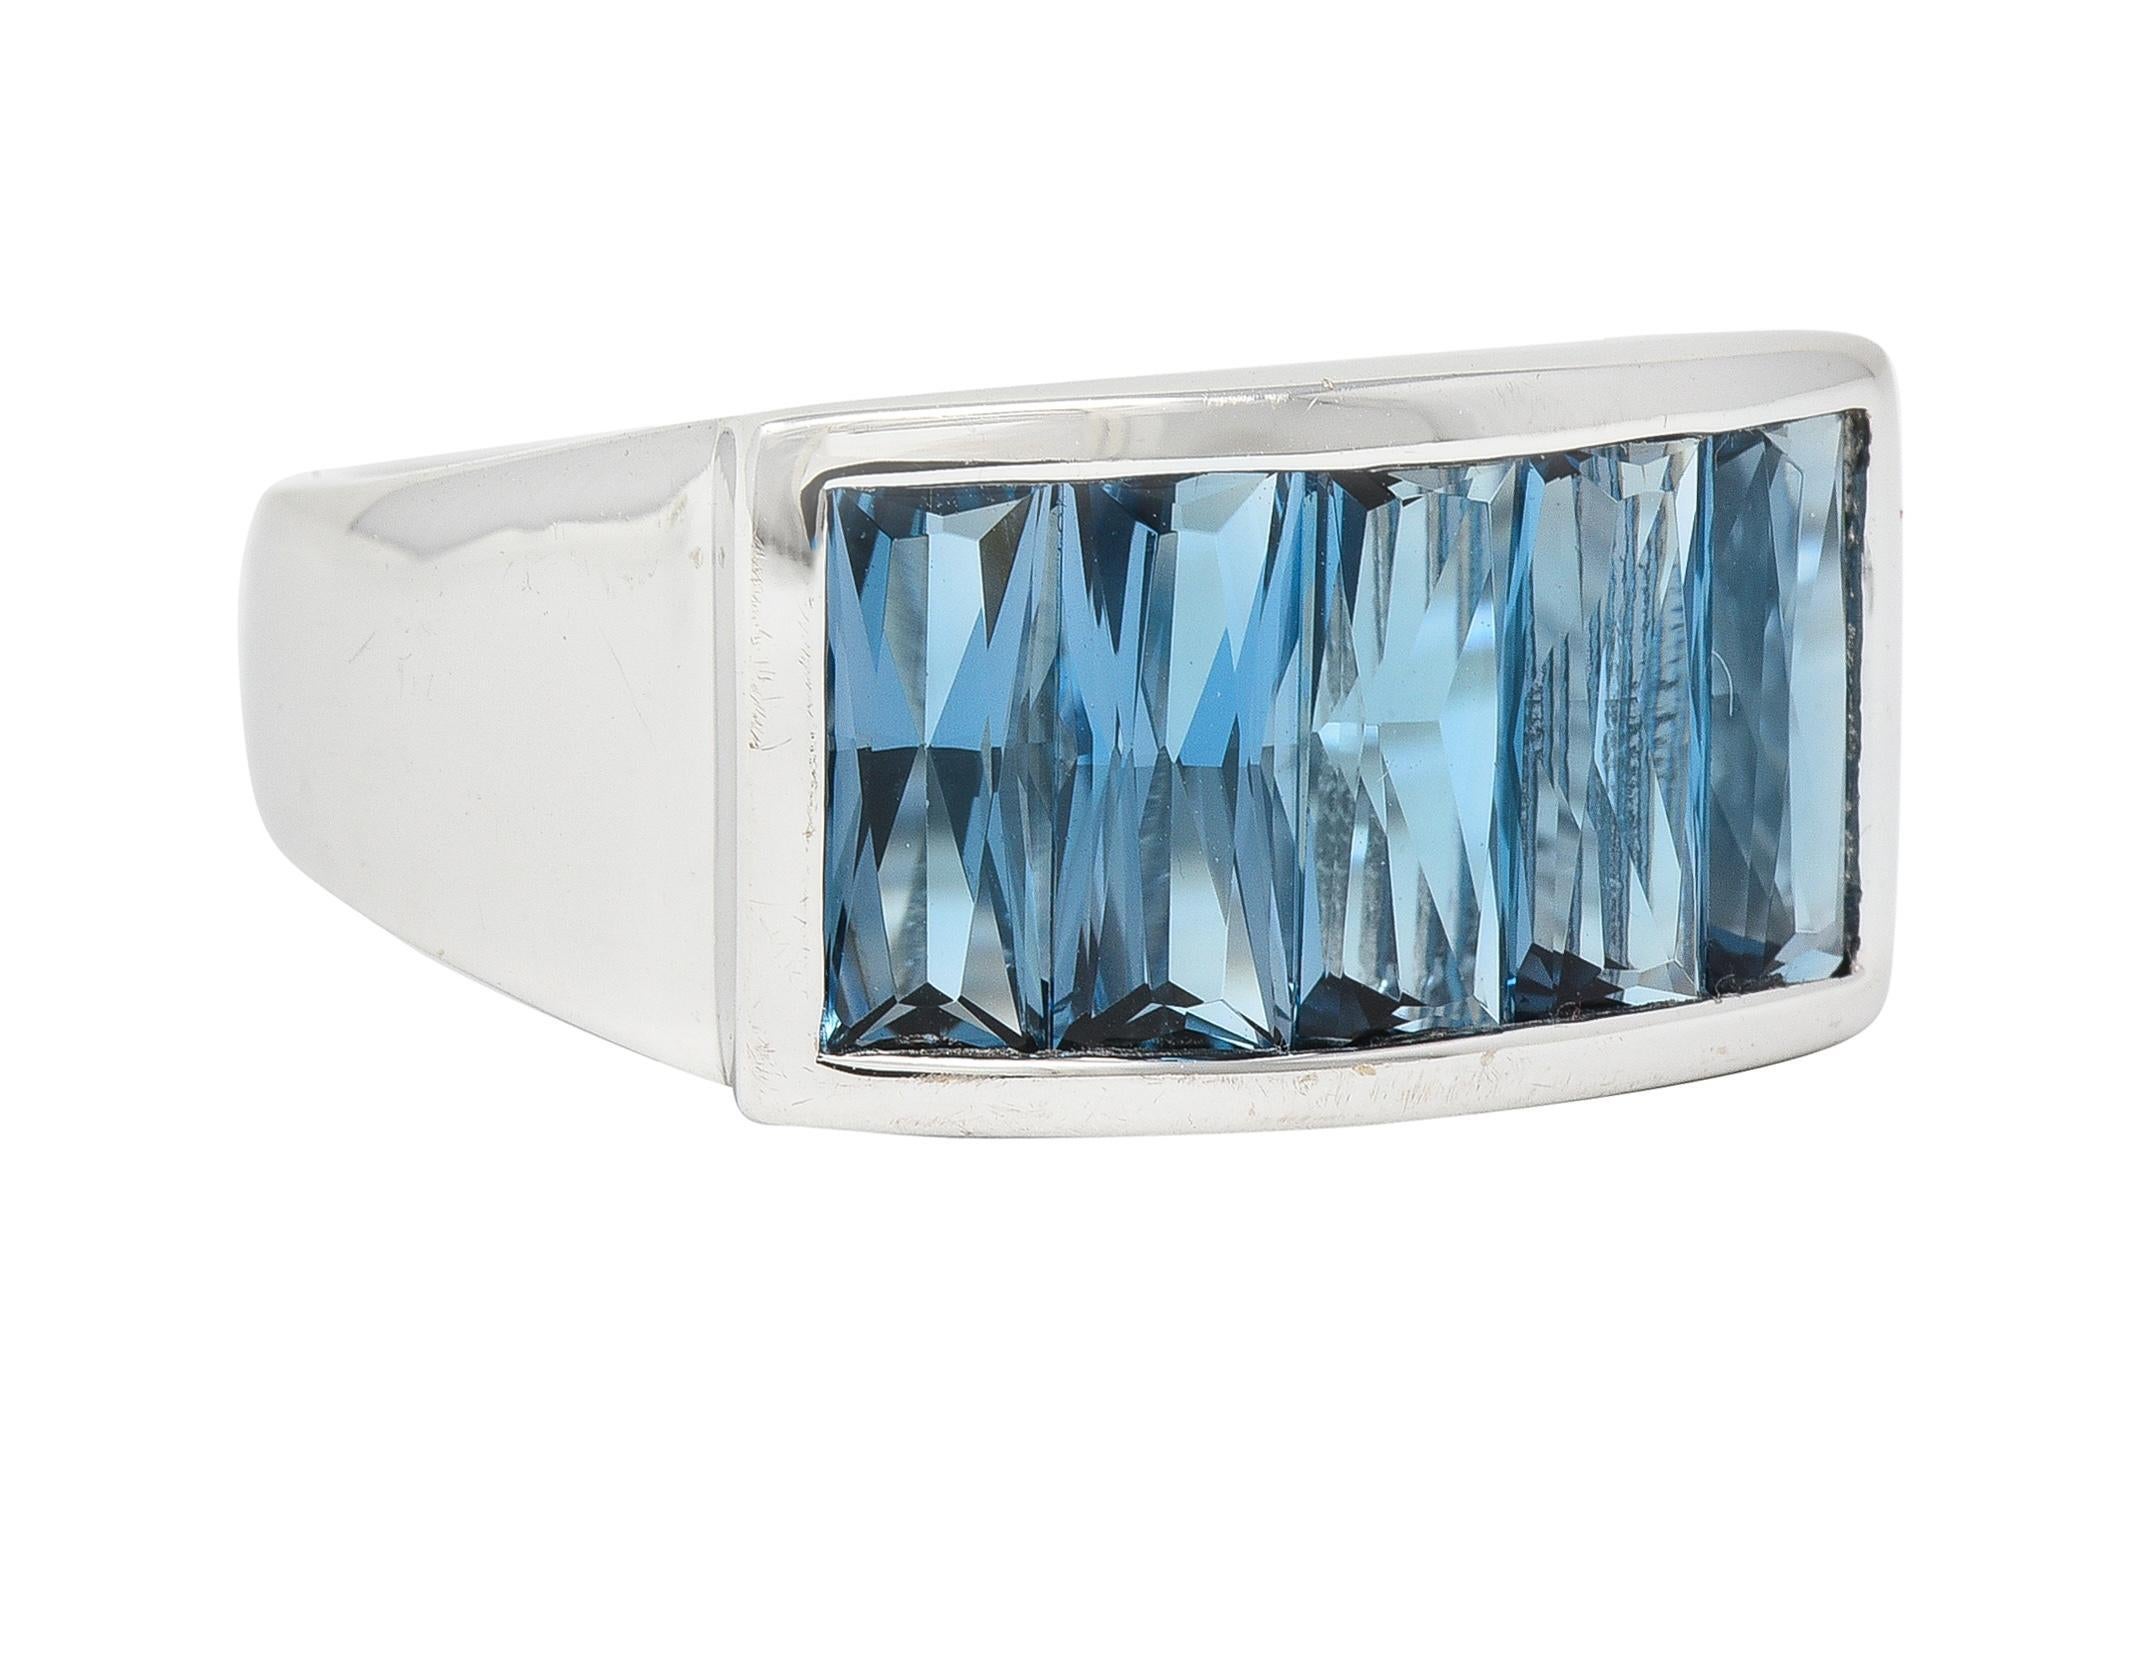 Centering five French cut topaz weighing approximately 5.00 carats total
Transparent bright blue in color with light saturation
Set east to west in a raised channel
With high polish surround 
Stamped for 18 karat gold
With maker's mark for H.